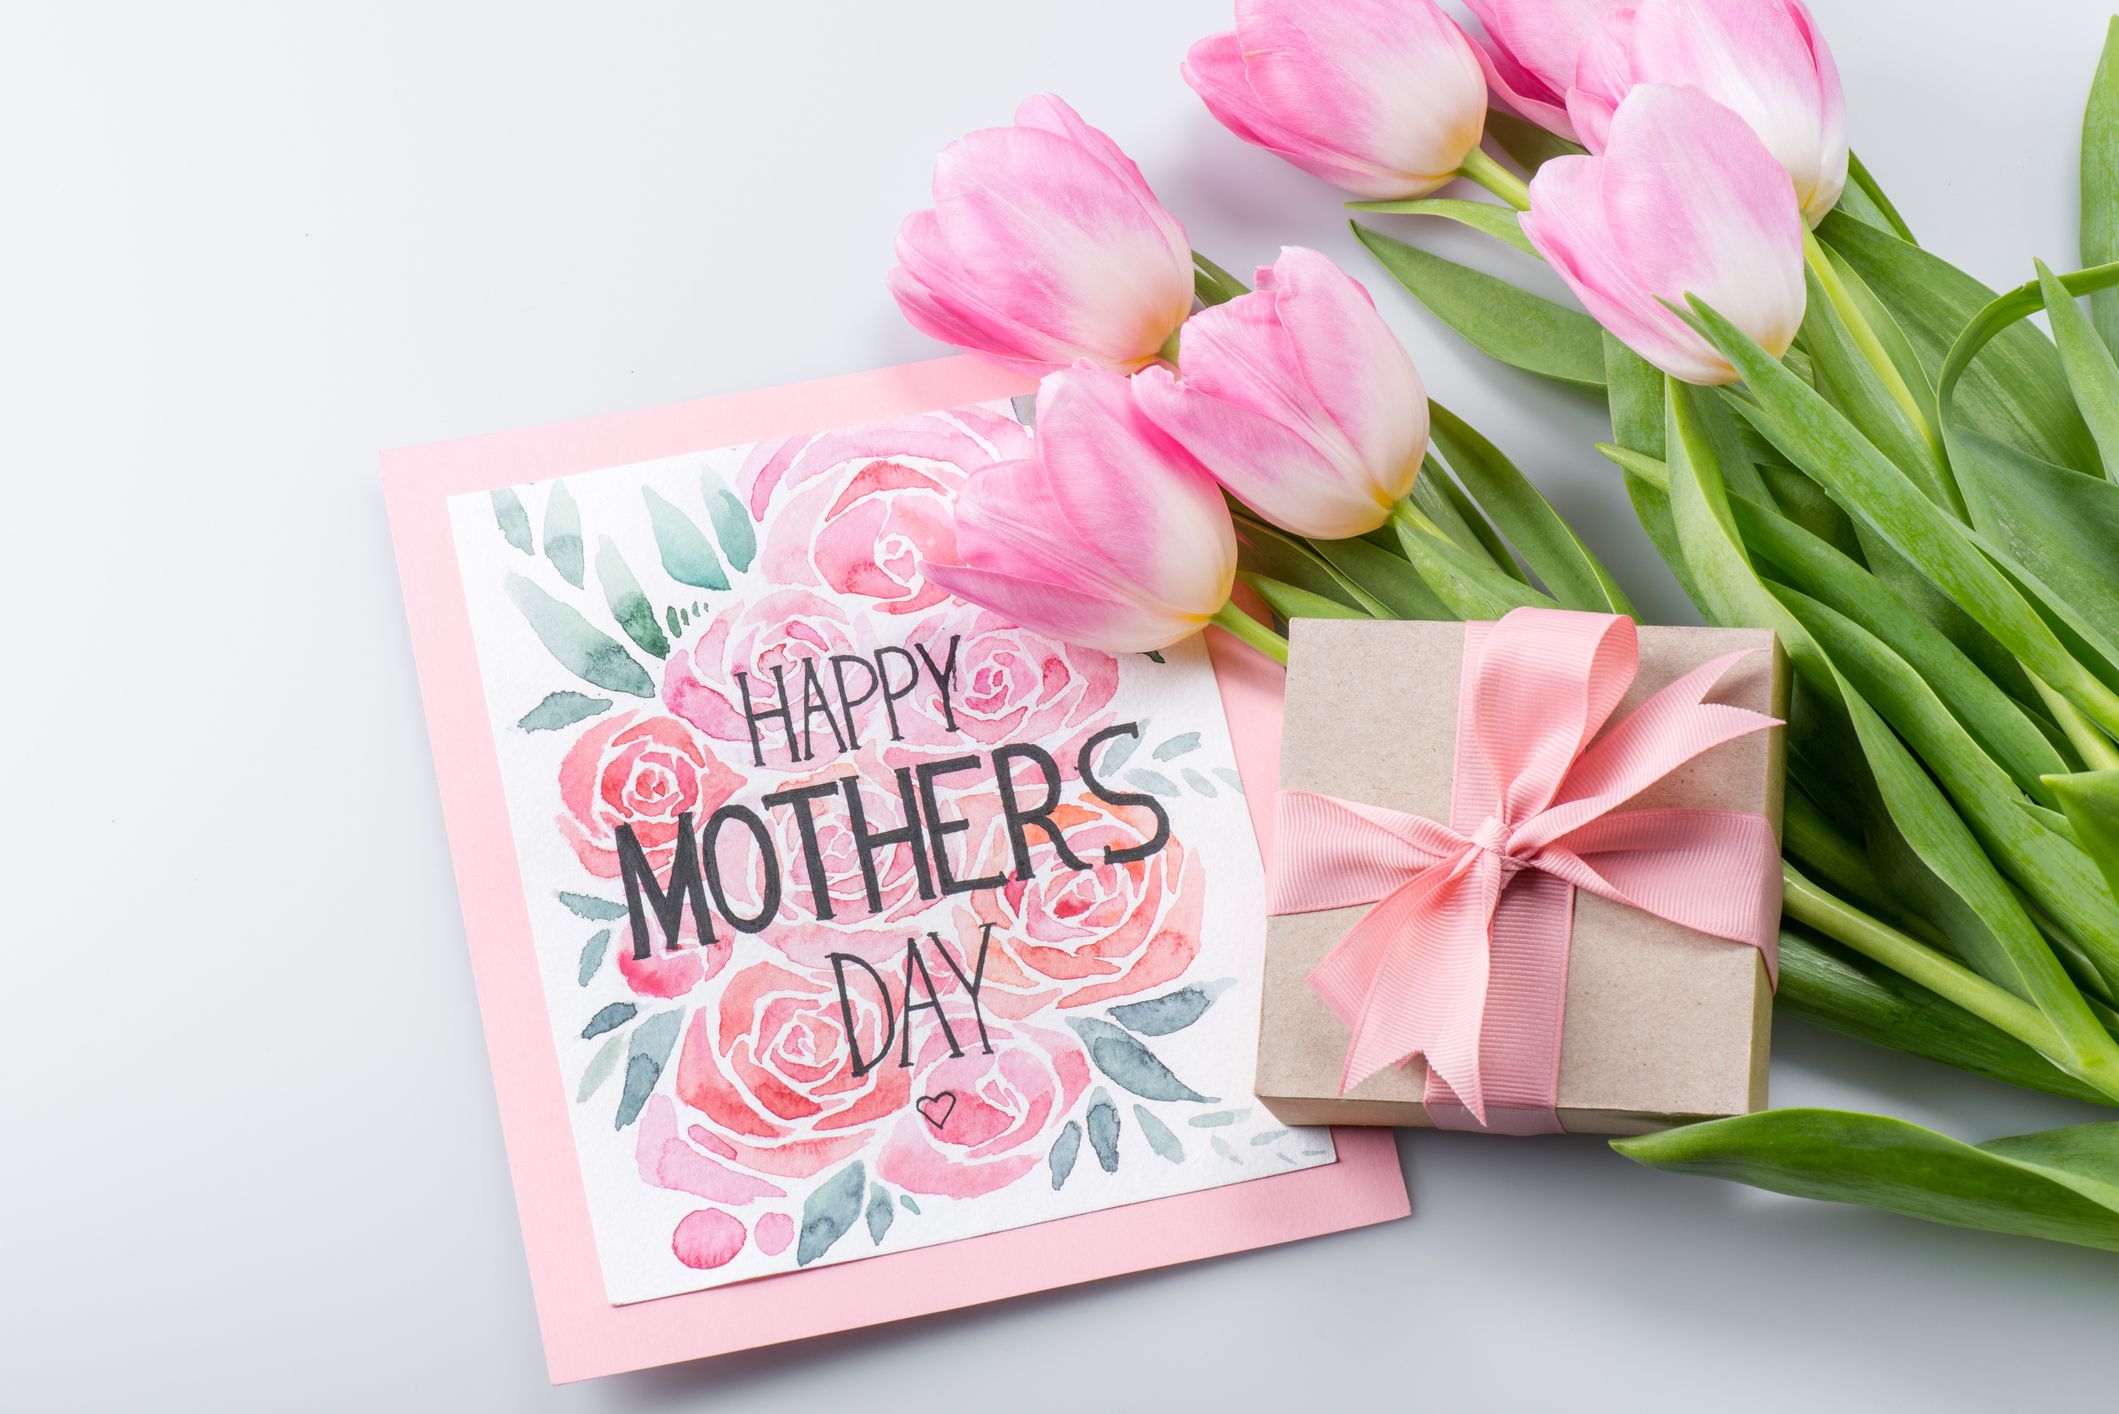 35+ Thoughtful Mother's Day Crafts & DIY Gift Ideas  Mothers day crafts,  Diy mother's day crafts, Diy crafts for gifts